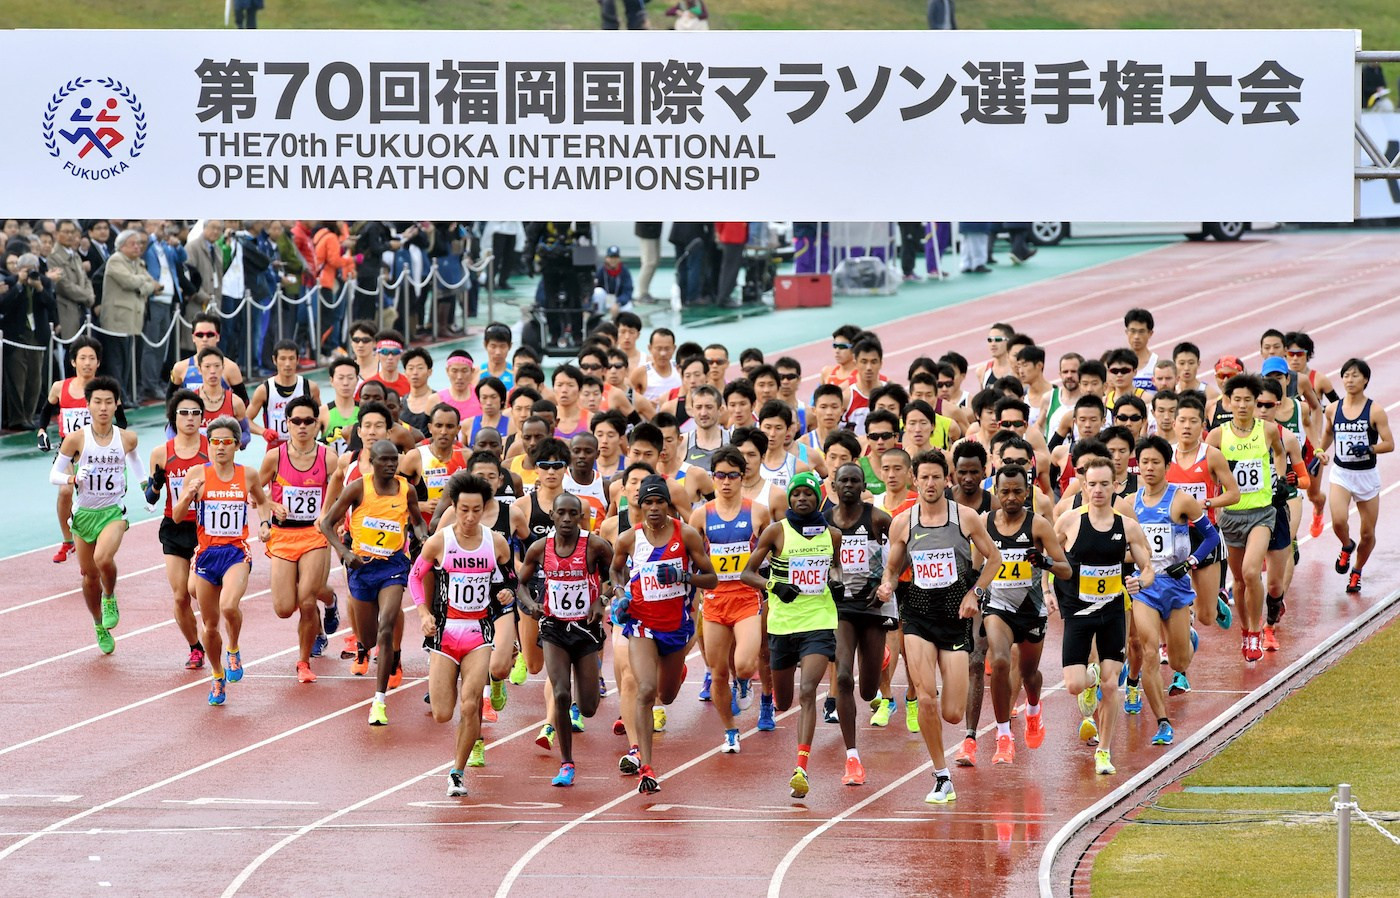 The Fukuoka Marathon, first held in 1947, is one of the sport's top road races and the scene of two world records ©Getty Images